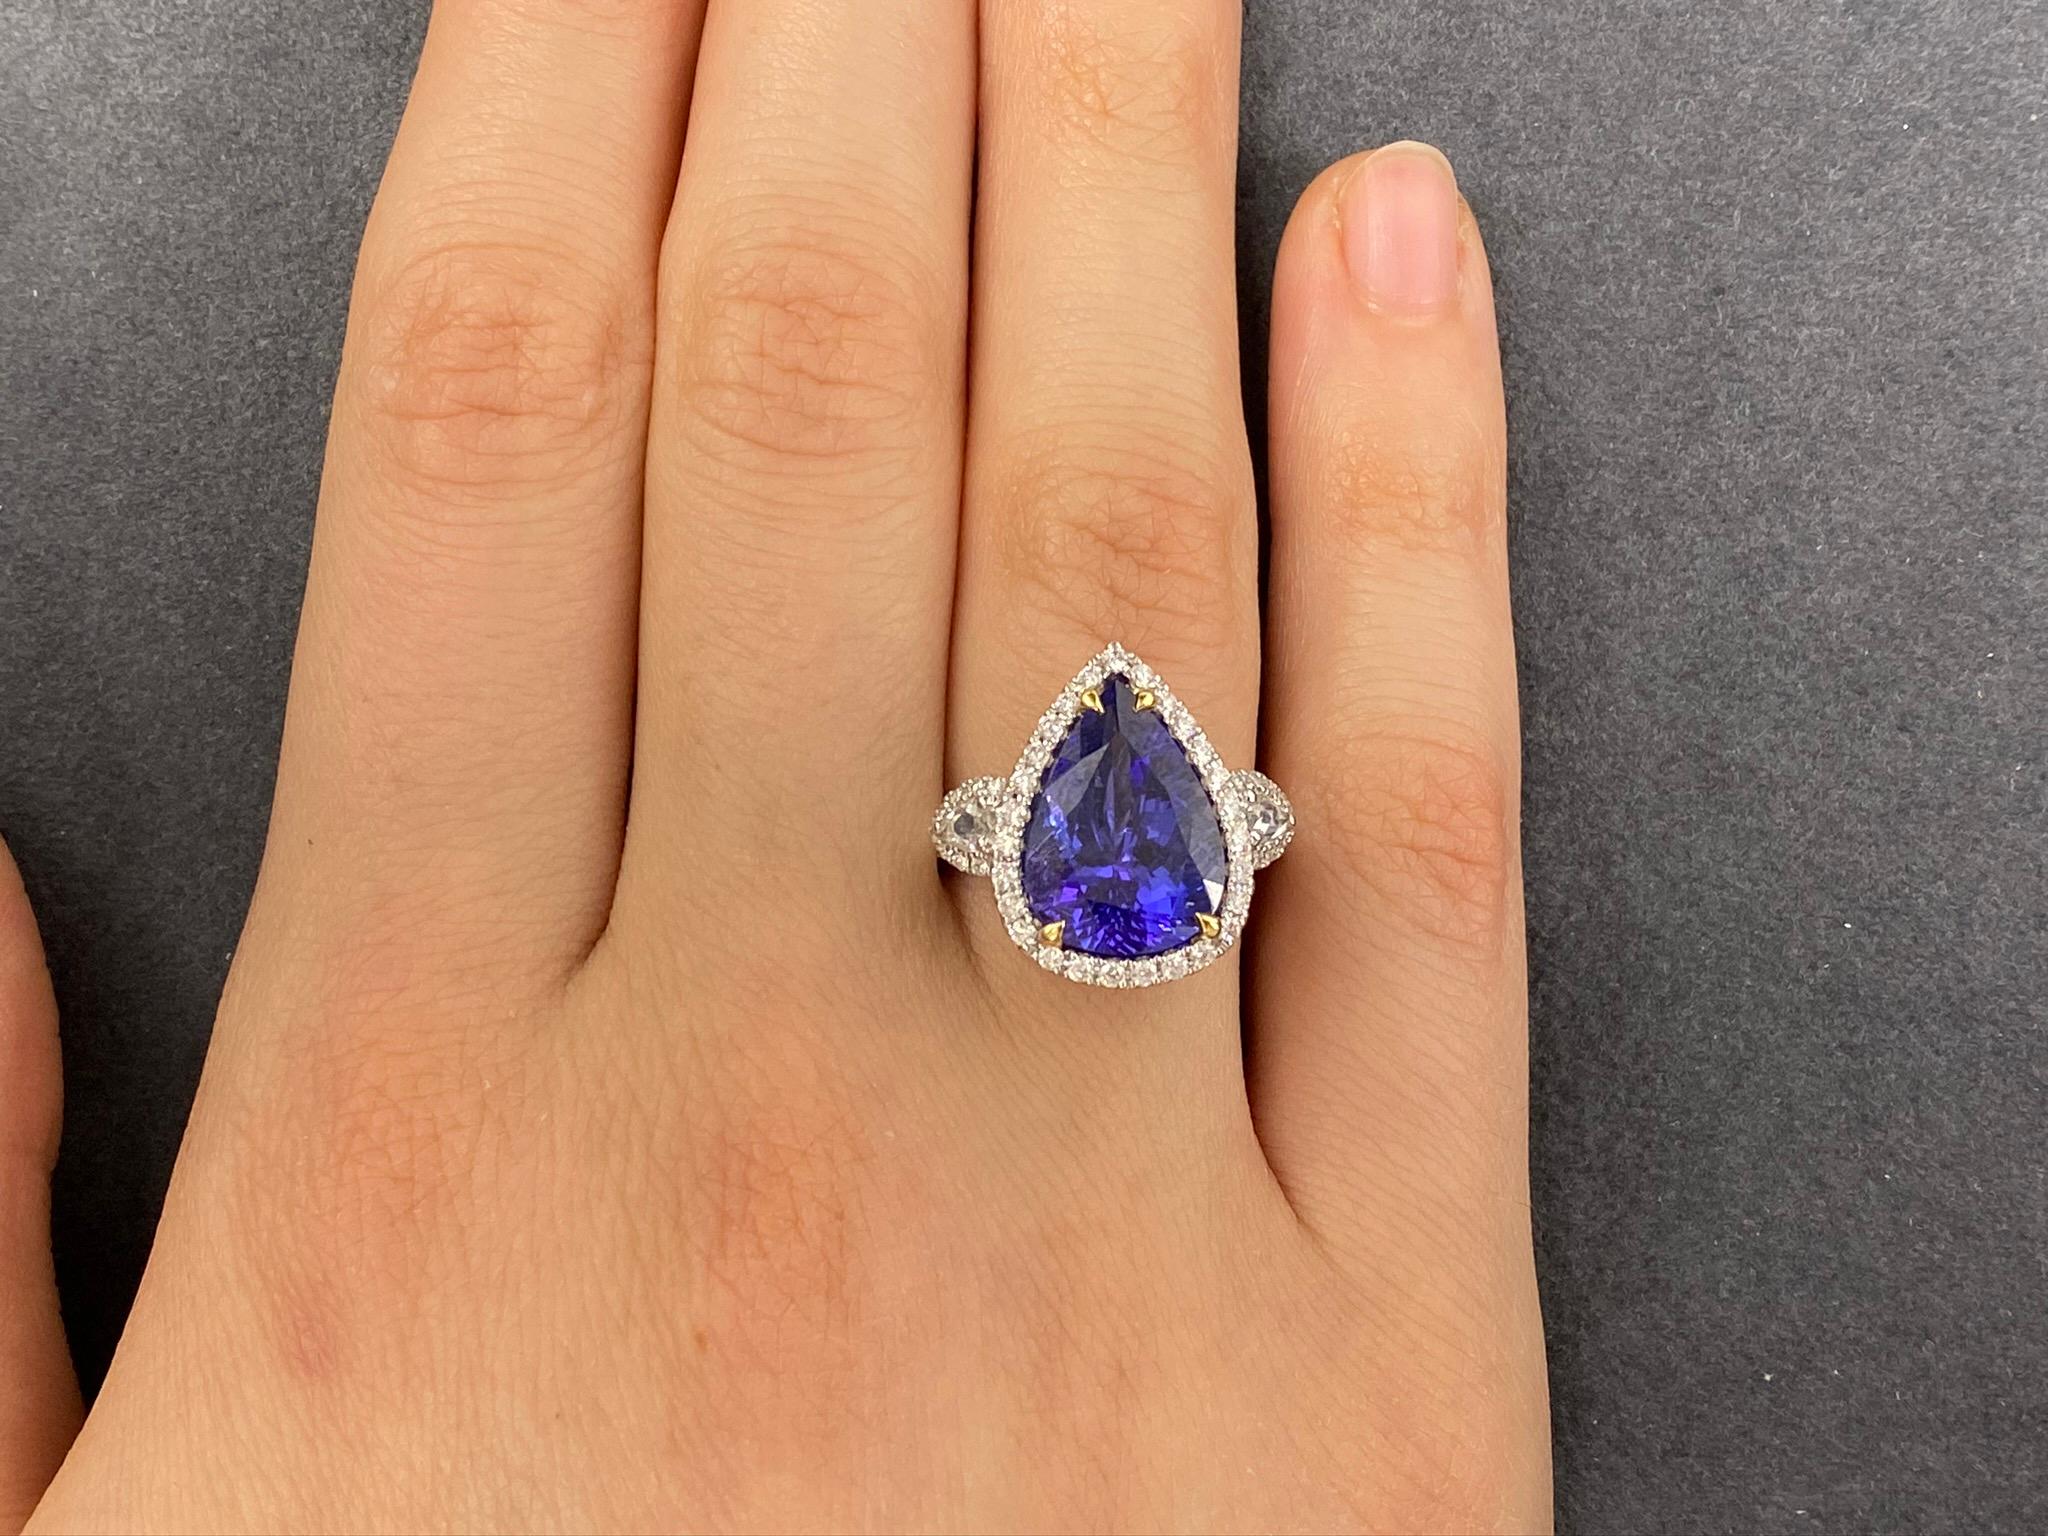 This stunning cocktail ring showcases a beautiful 5.94 Carat Pear Shape Tanzanite with a Diamond Halo. The Tanzanite is flanked by two Rose Cut White Diamonds, and sits on a Diamond Shank. This ring is set in 18k White Gold, with 18k Yellow Gold